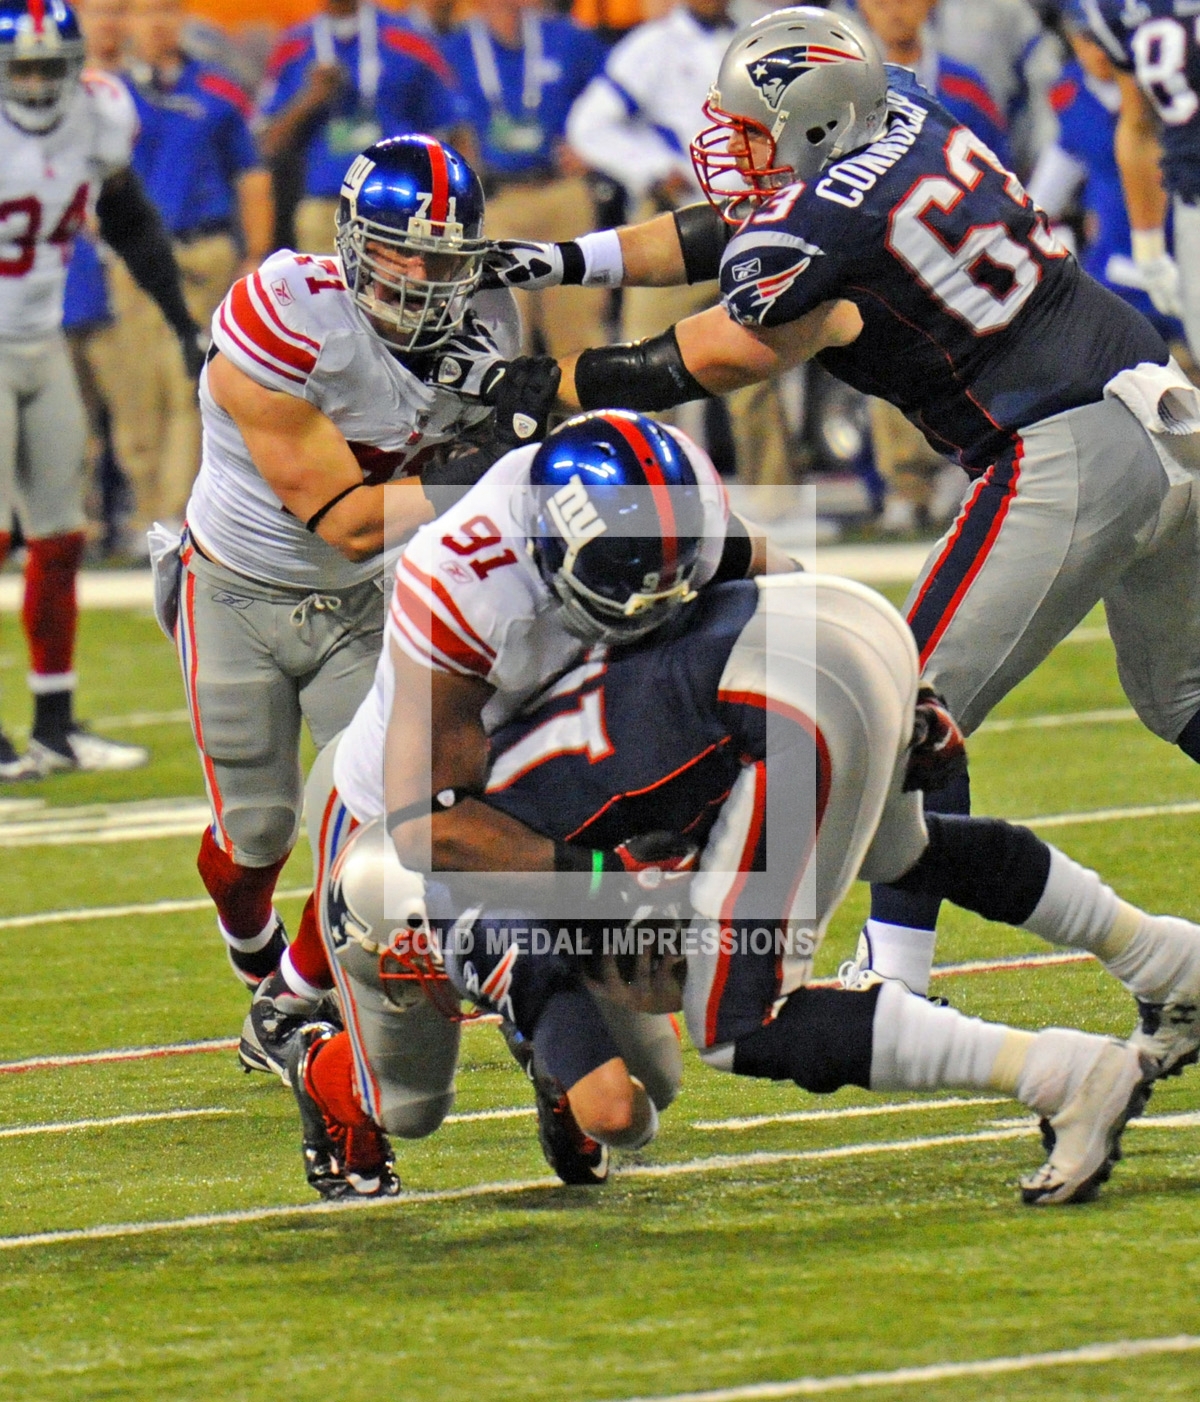 New York Giants defensive end, Justin Tuck, sacks New England Patriots quarterback, Tom Brady,in the third quarter of the Super Bowl. The Giants defeated the Patriots 21-17, winning their fourth Super Bowl and 8th NFL title.(